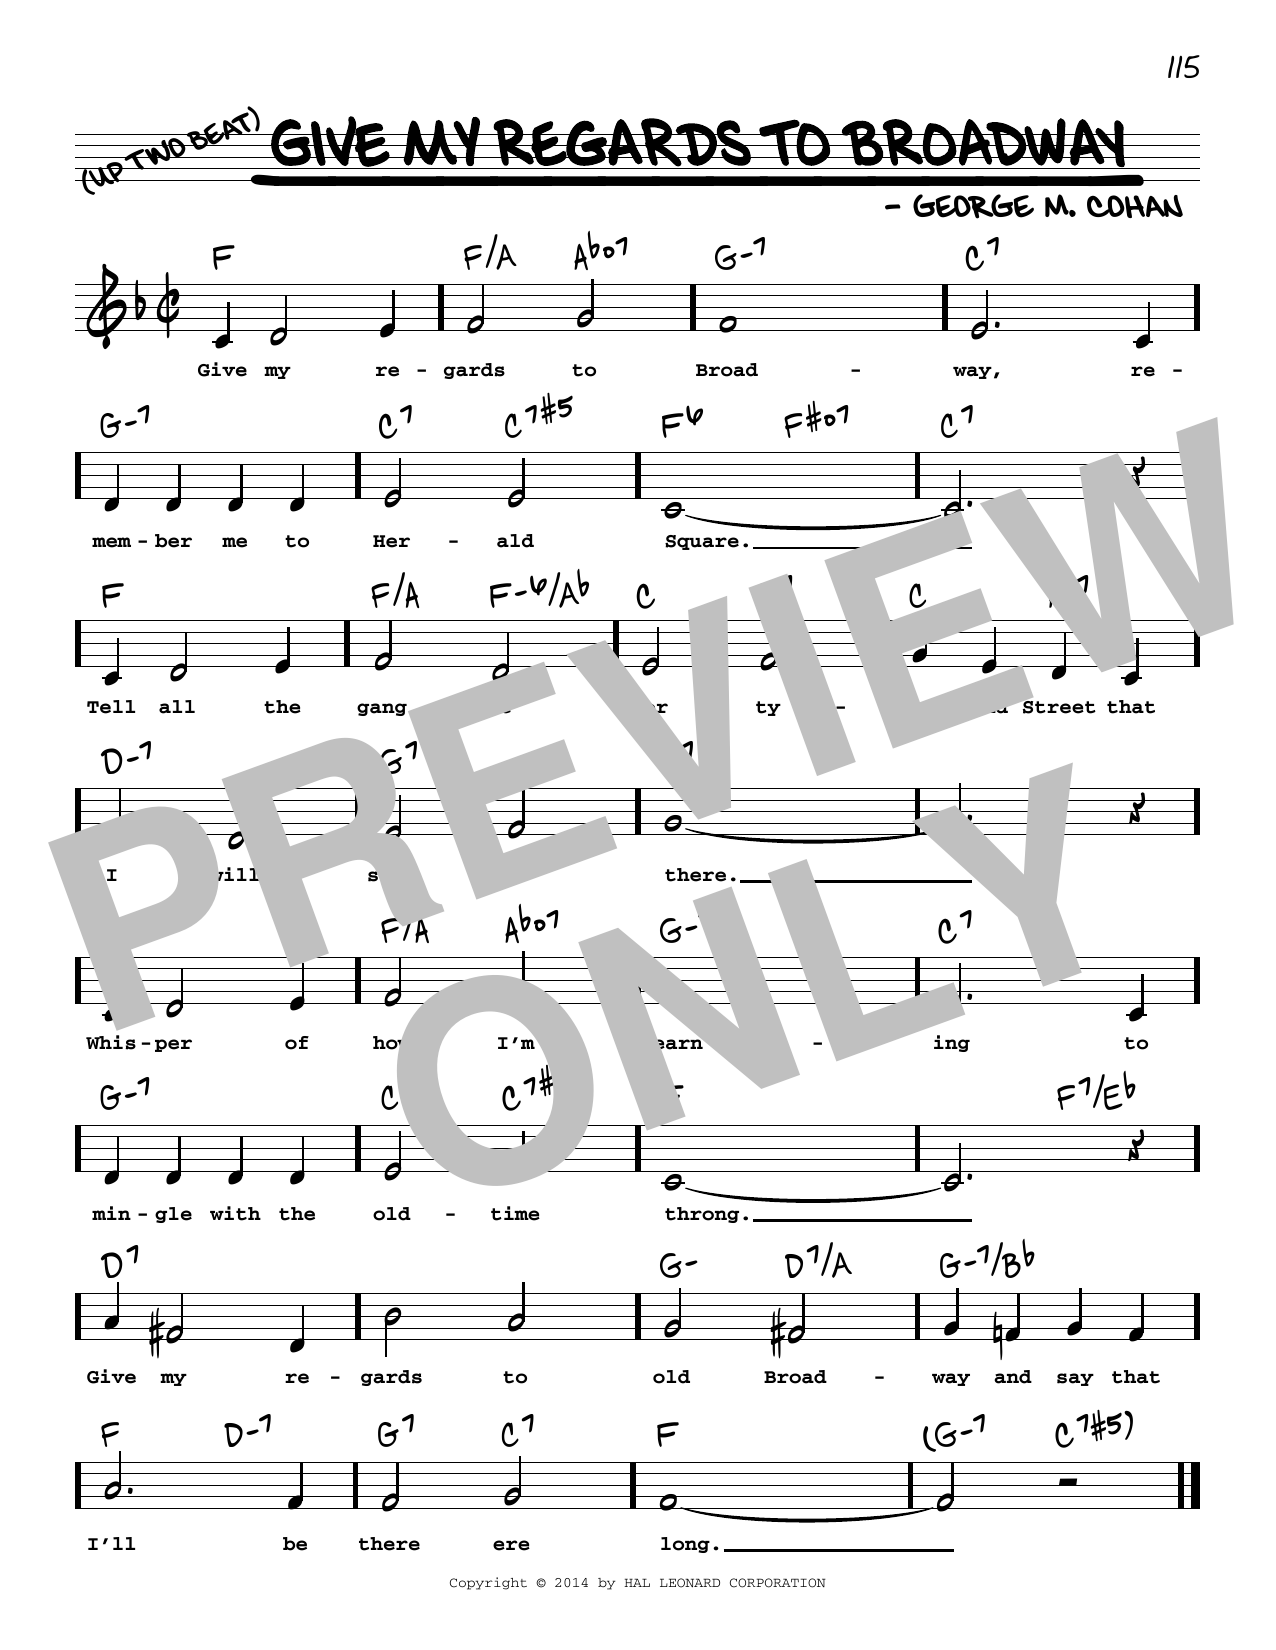 Download George M. Cohan Give My Regards To Broadway (Low Voice) Sheet Music